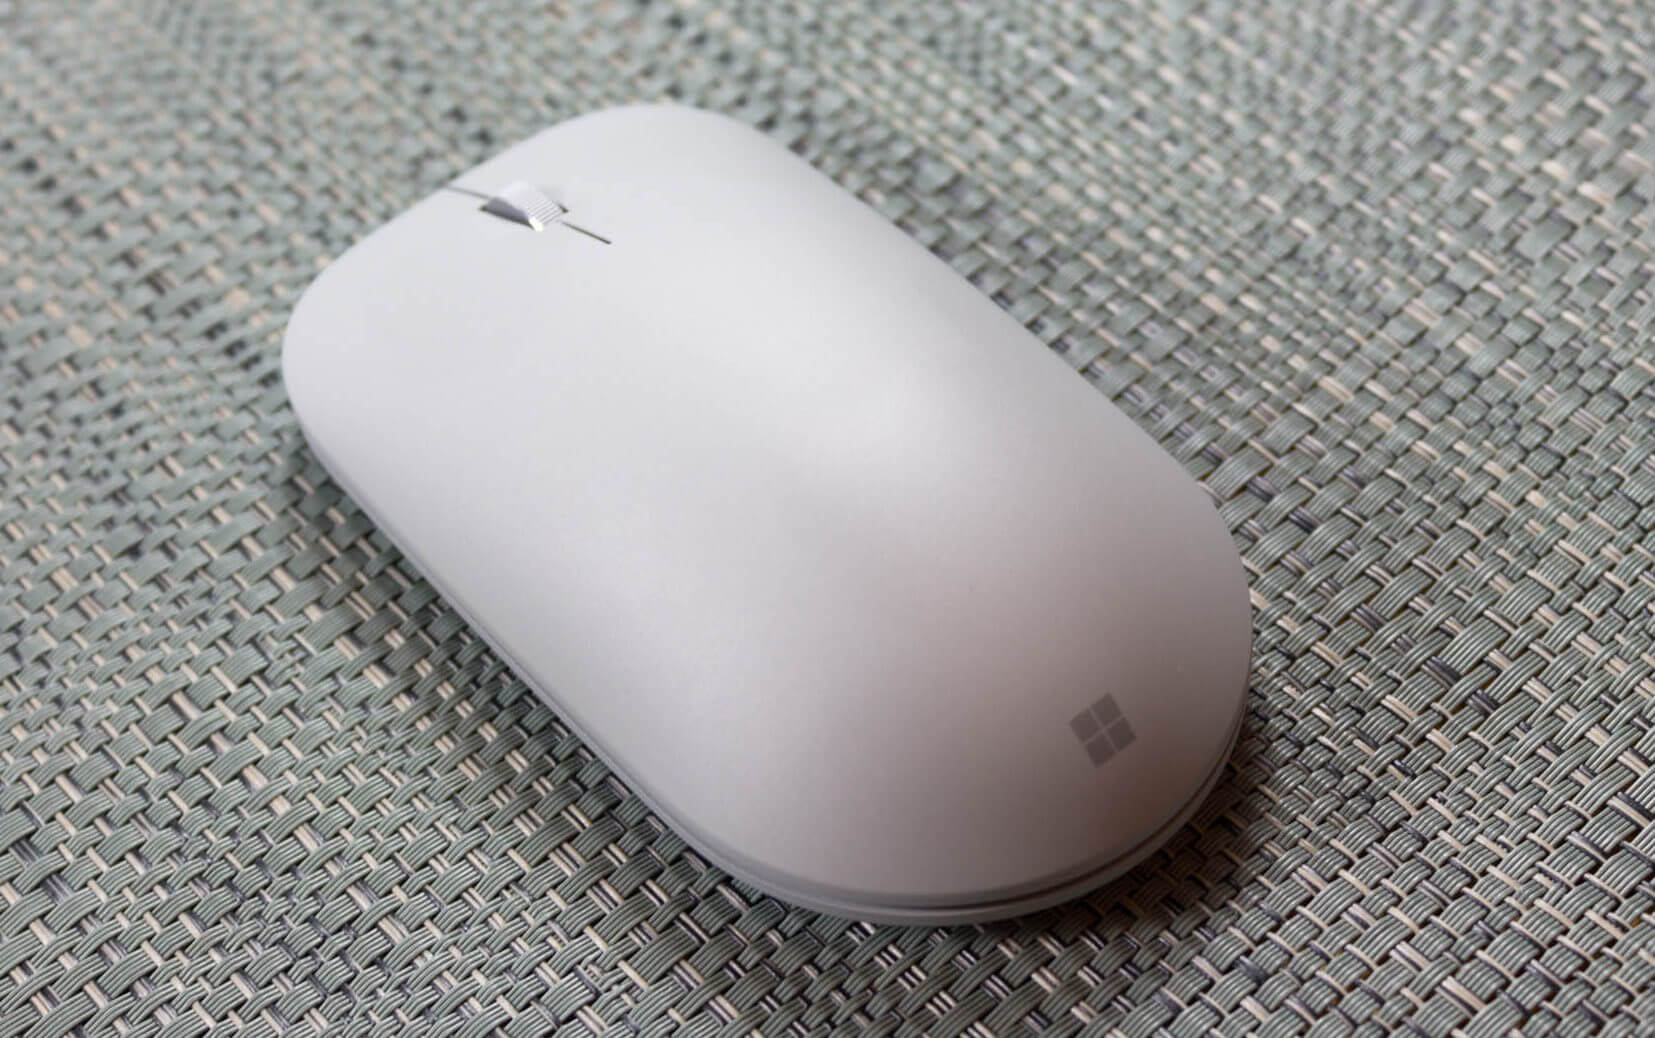 microsoft surface mouse 1 (1)